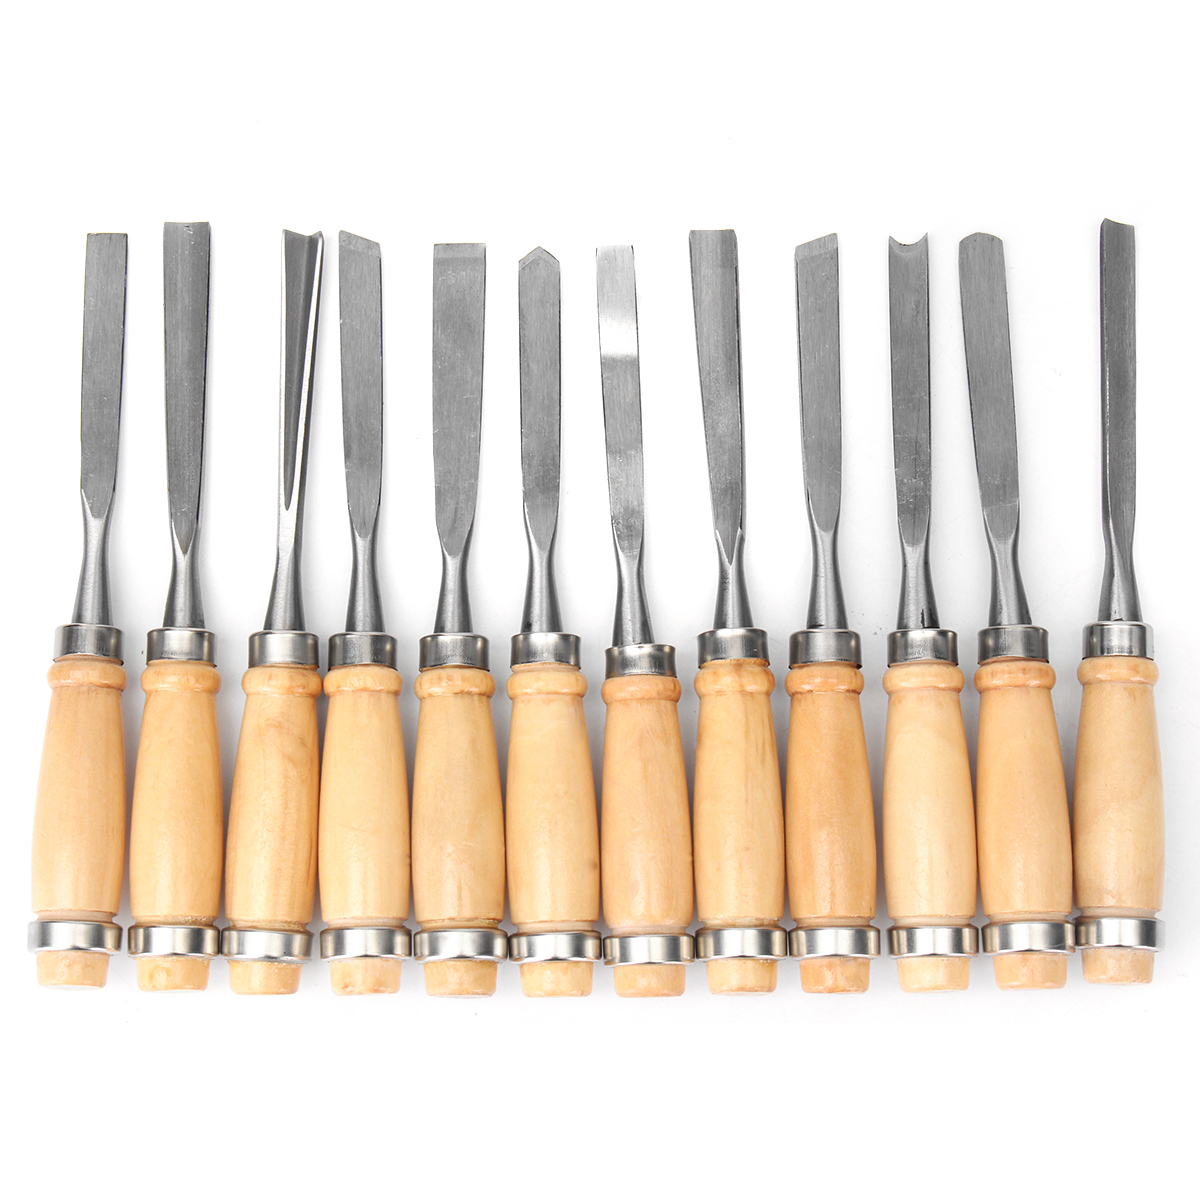 12pcs Wood Carving Hand Chisel Tool Set Professional Woodworking Gouges Steel